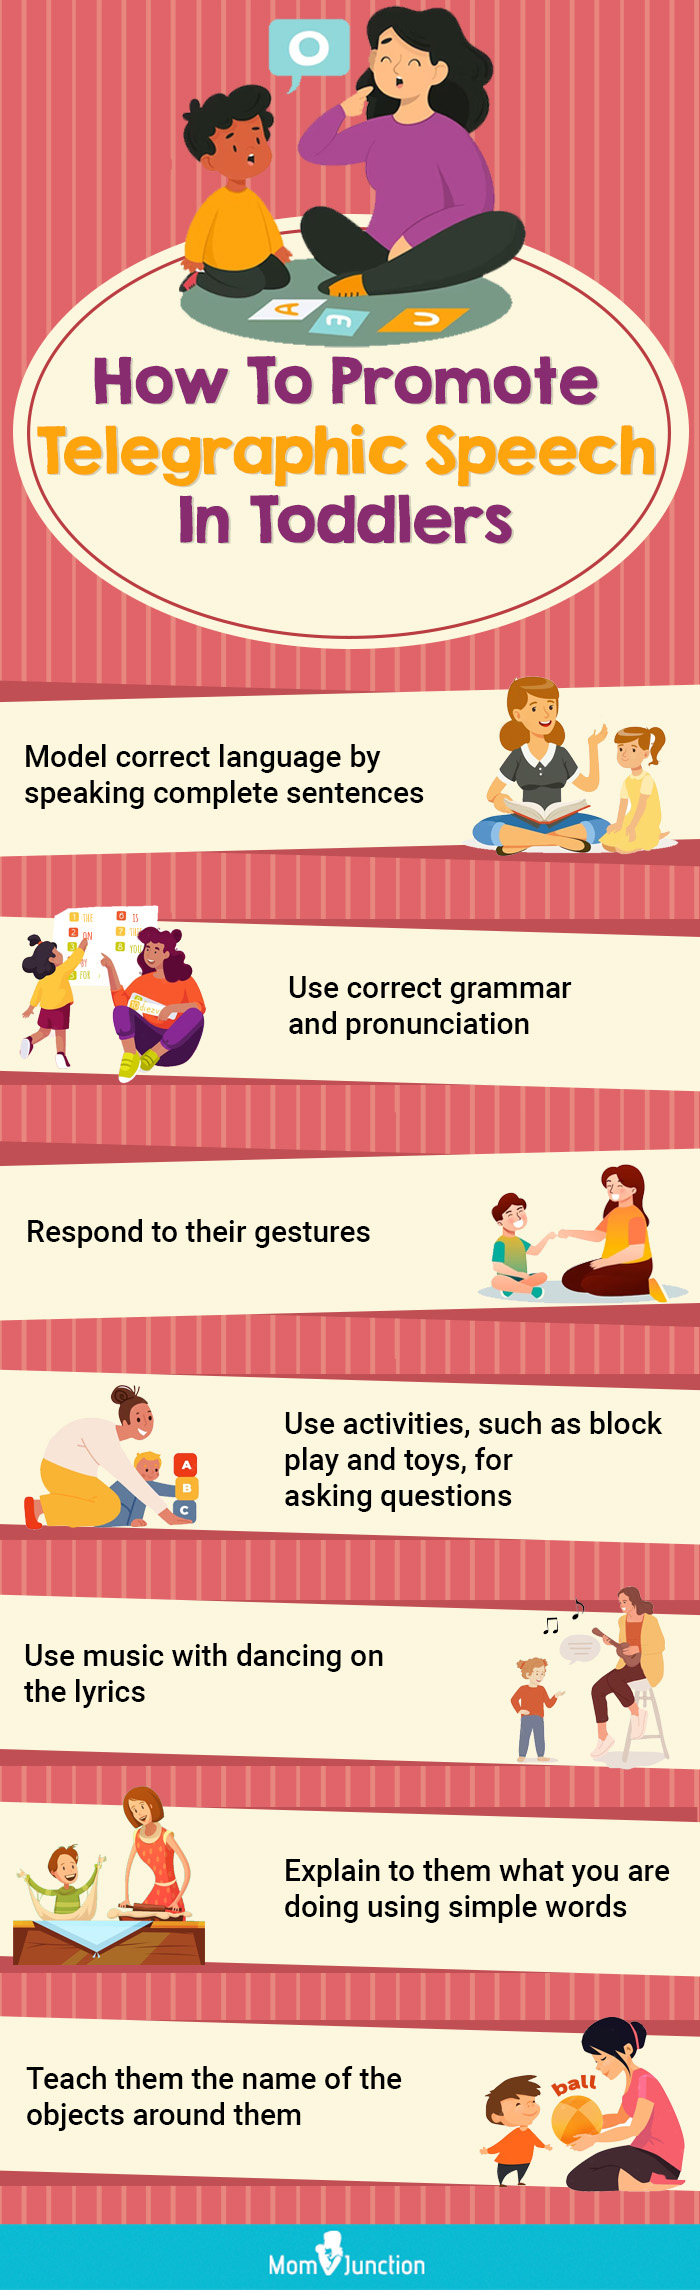 how to promote telegraphic speech in toddlers (infographic)